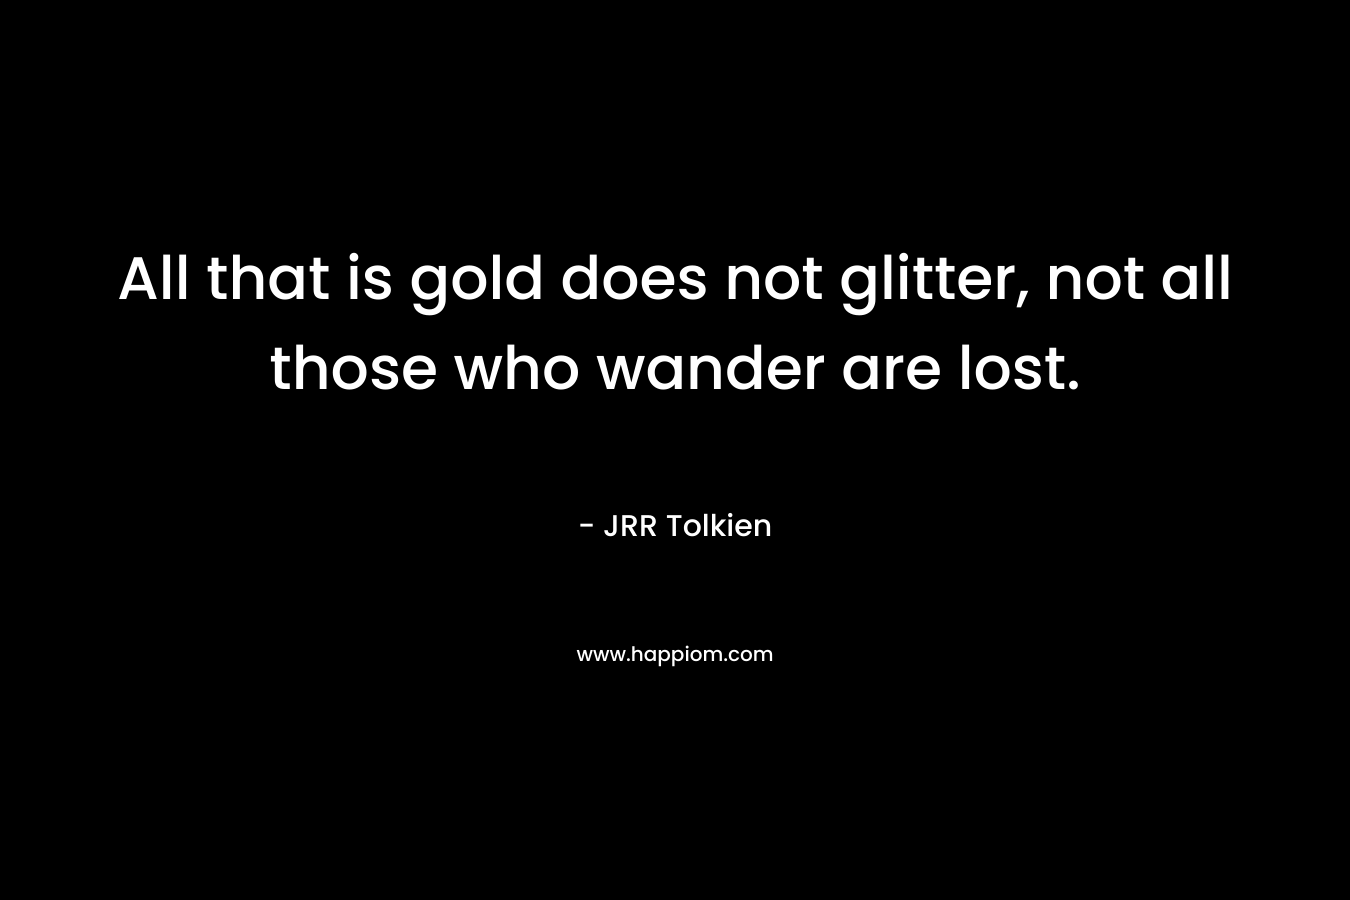 All that is gold does not glitter, not all those who wander are lost. – JRR Tolkien